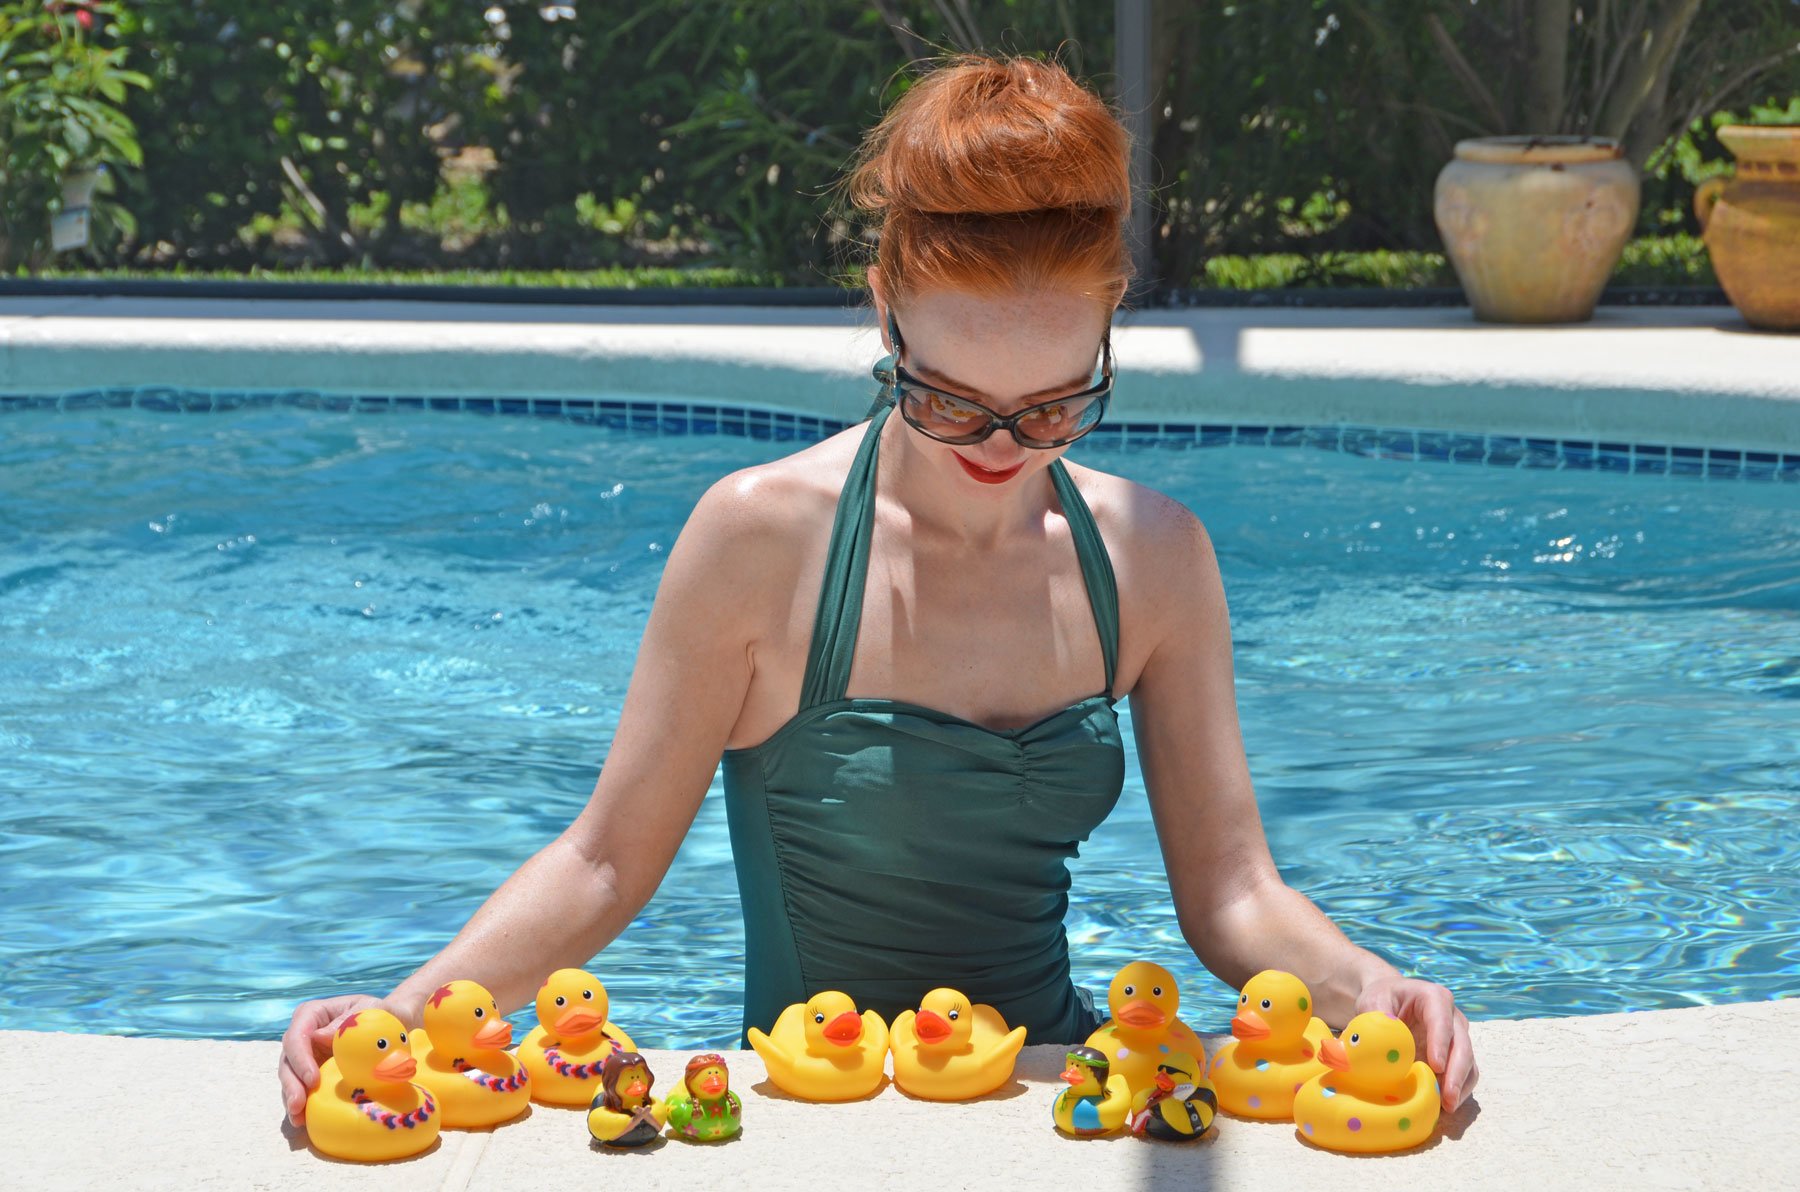 rubber ducks by the pool